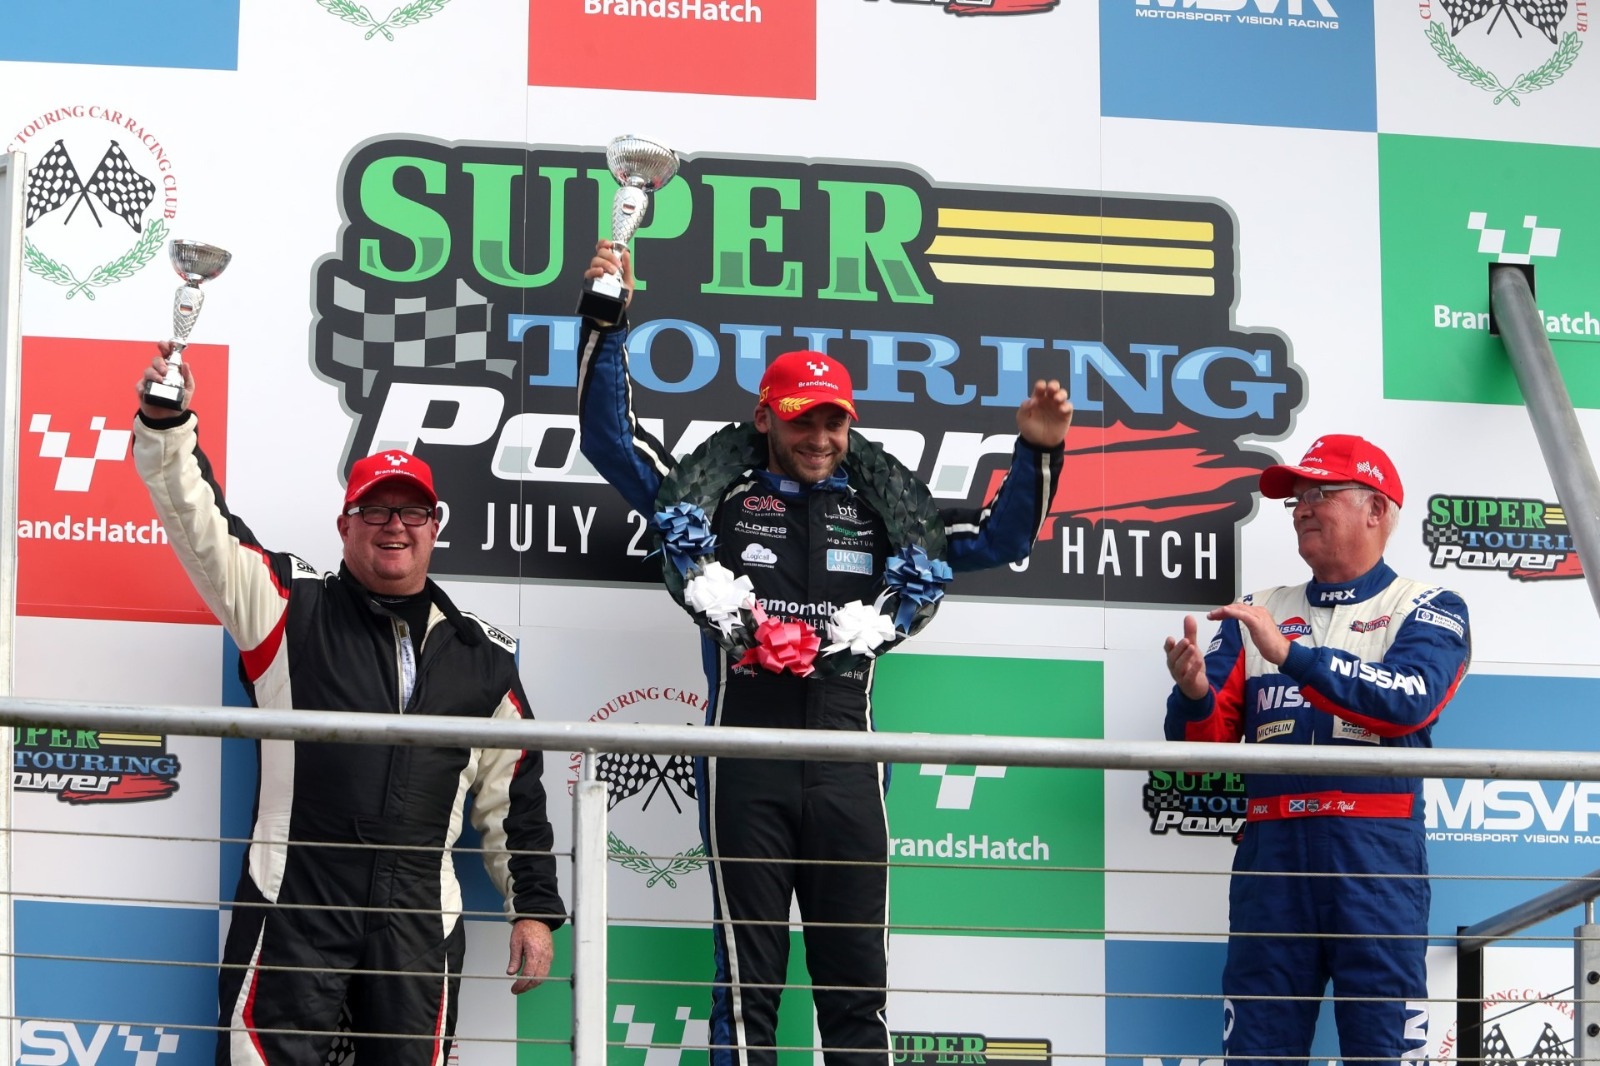 Jake Hill scored four wins at Brands Hatch over the weekend